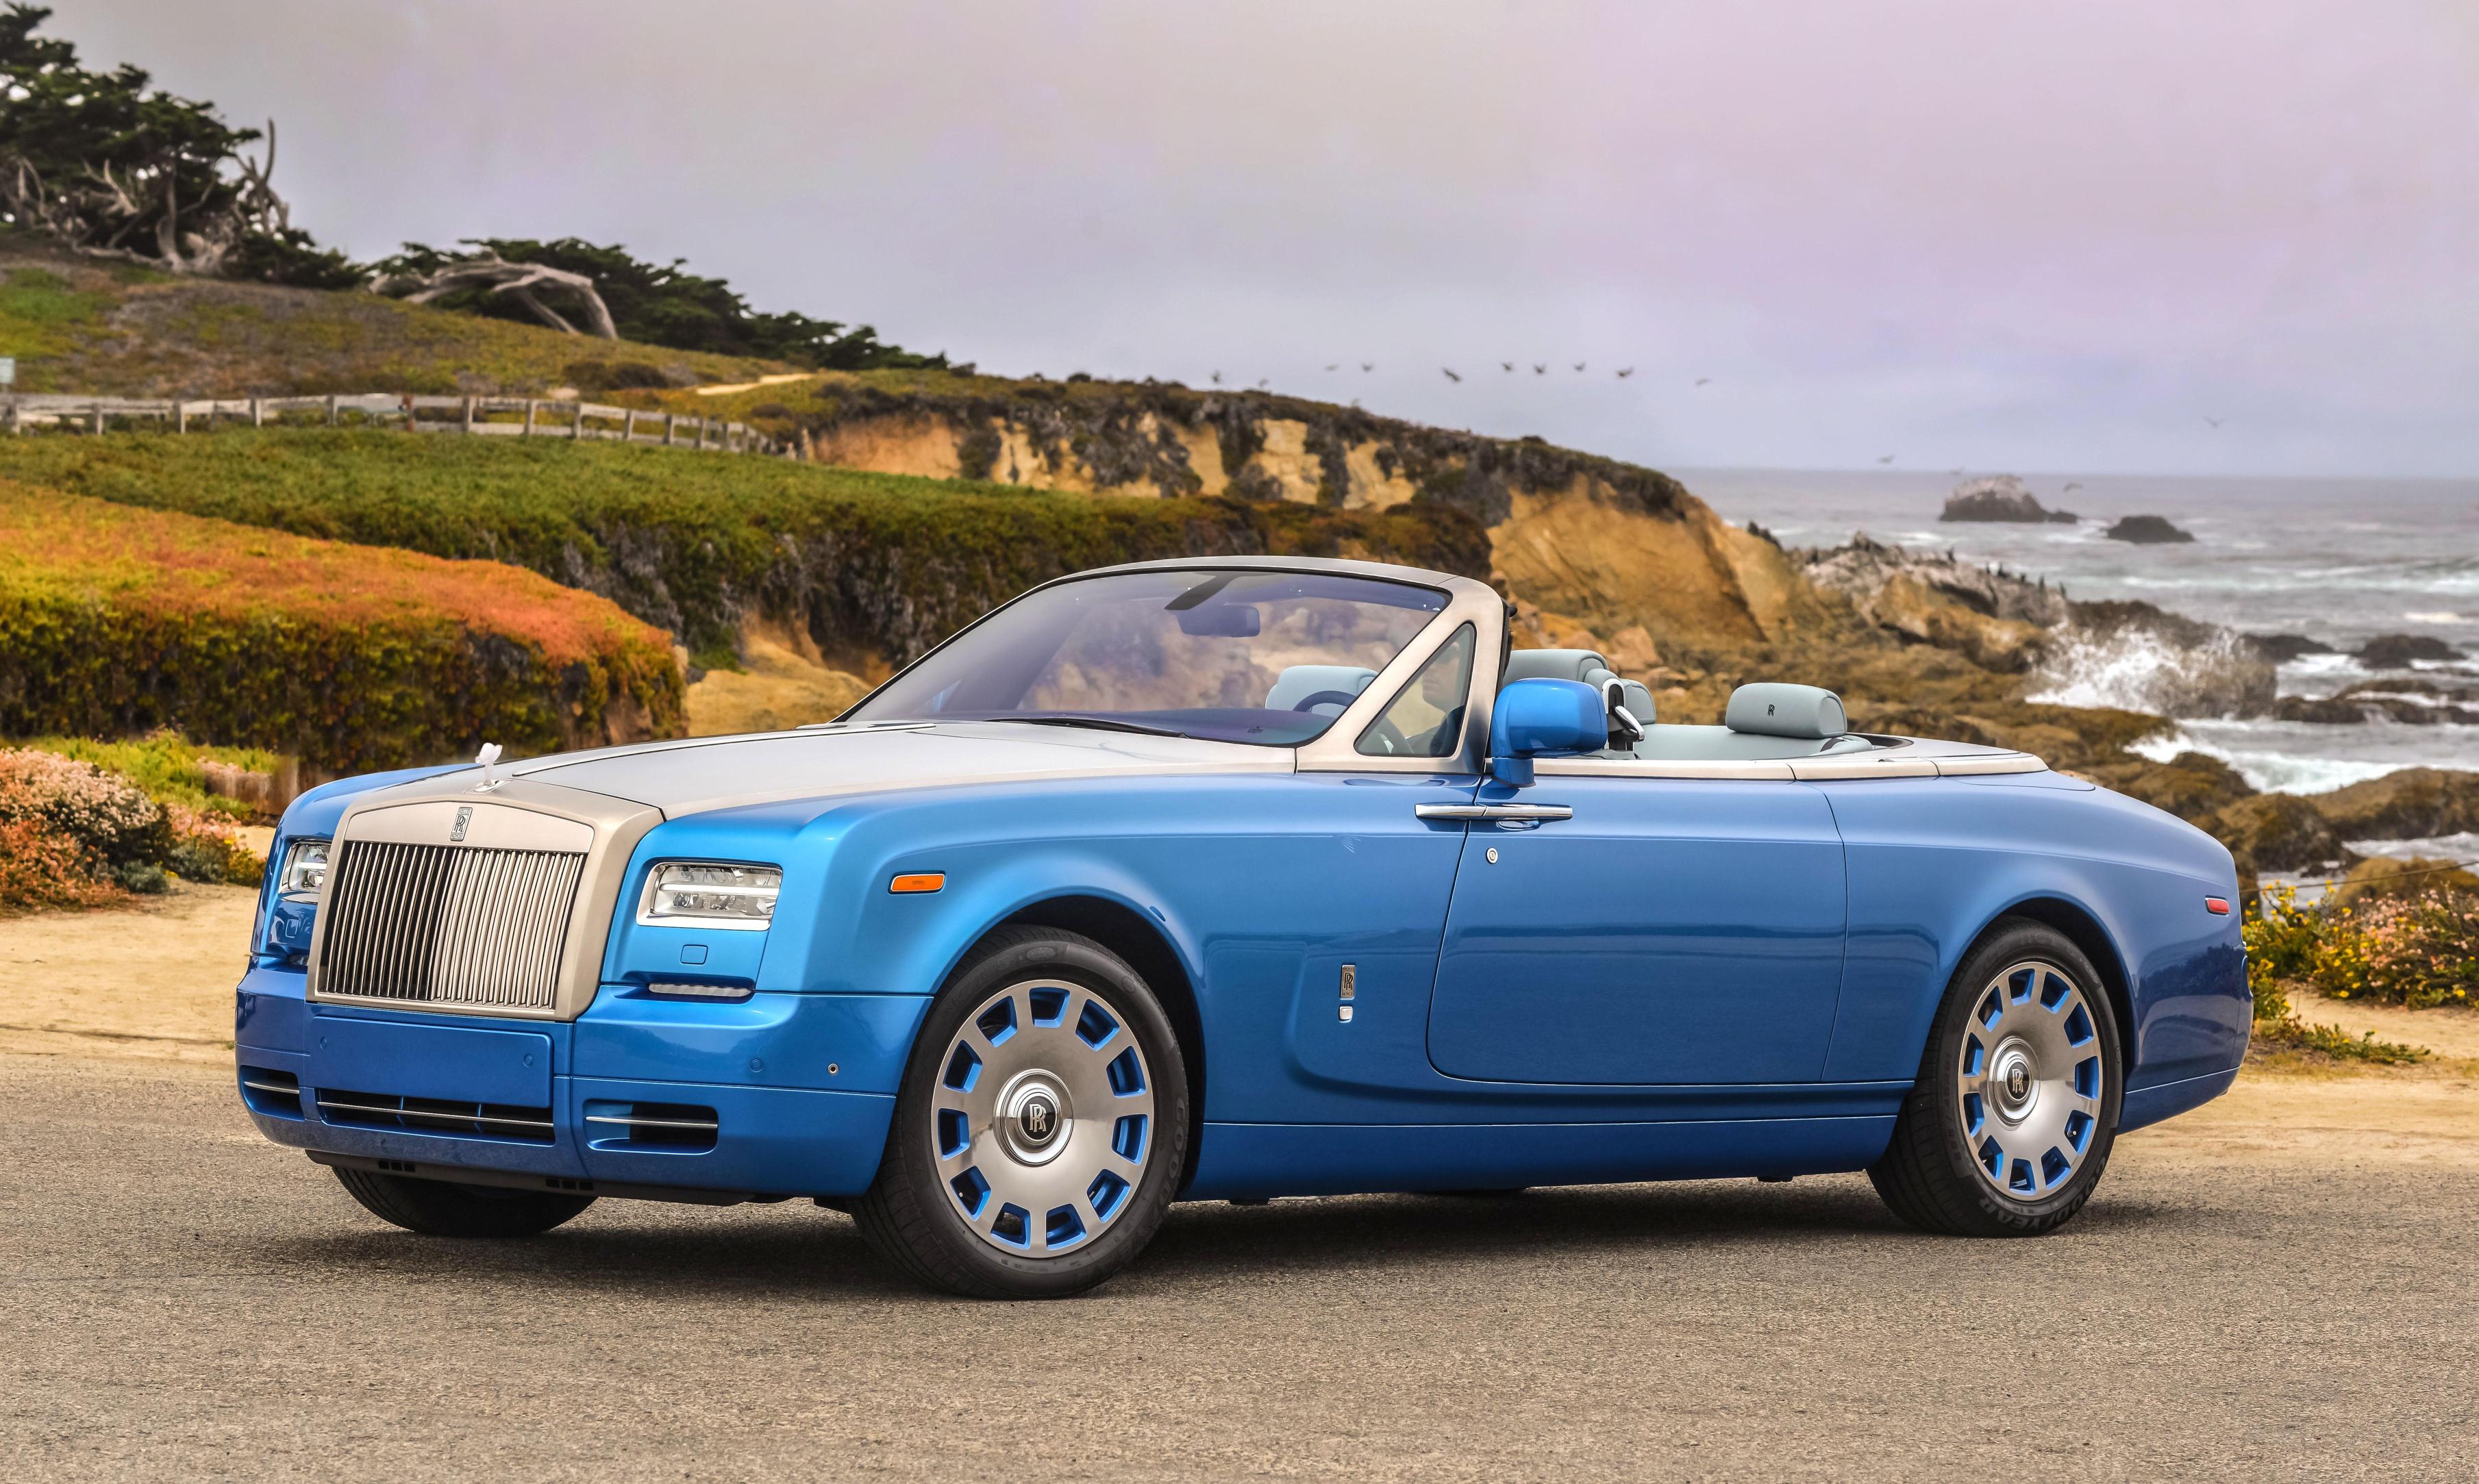 Car Rolls Royce Luxury Cars British Cars Blue Cars Convertible Side View Headlights Vehicle Water 3619x2167